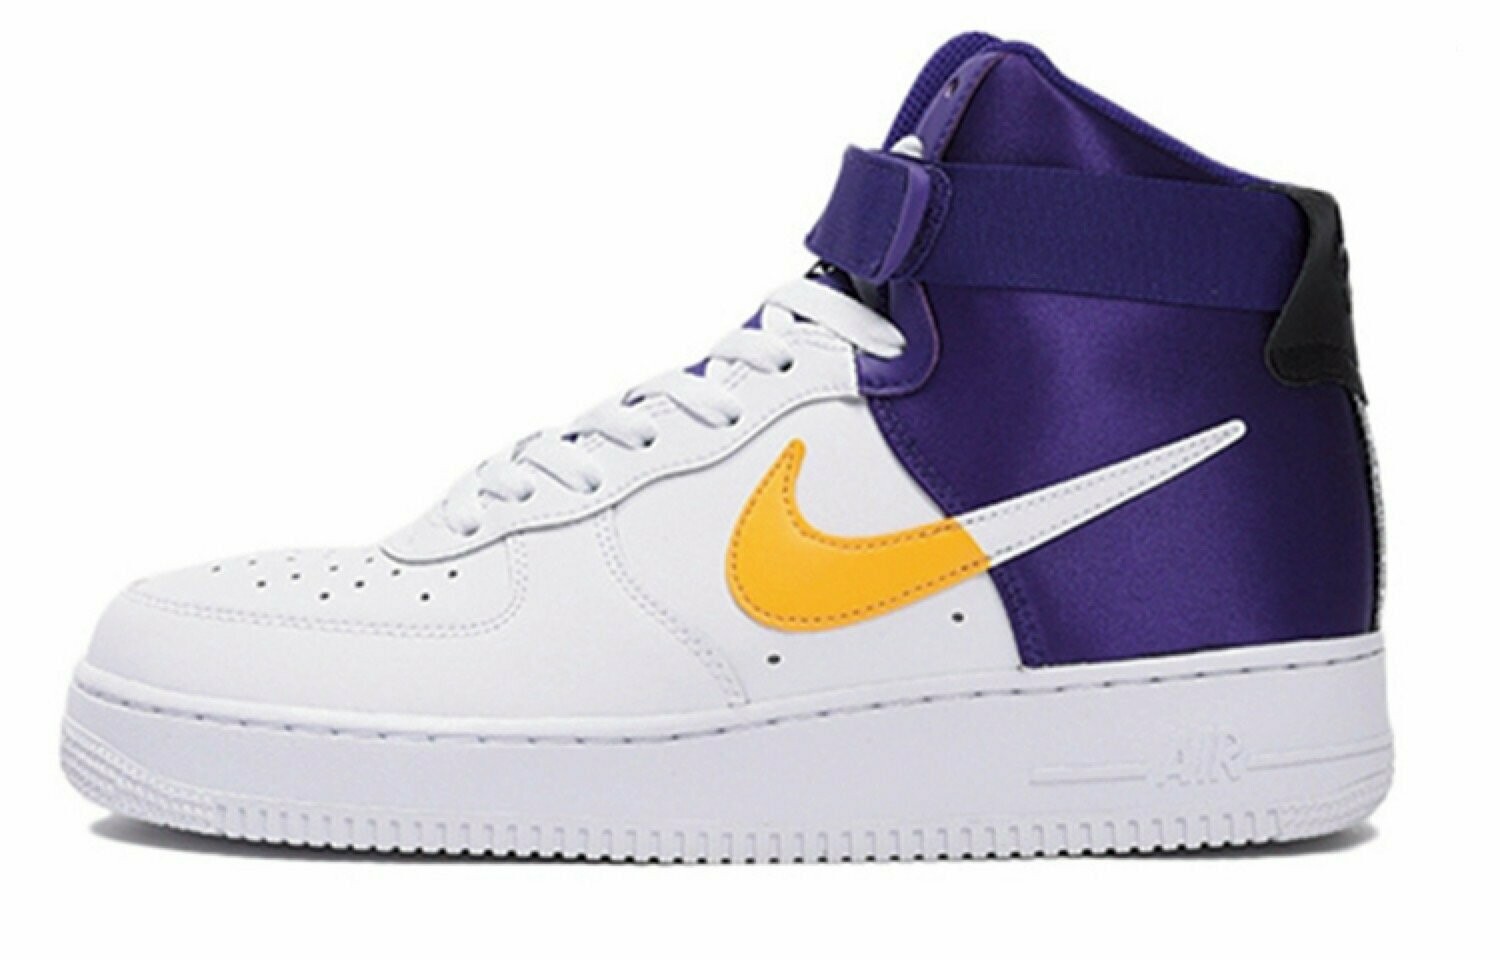 x Air Force 1 High "Lakers"